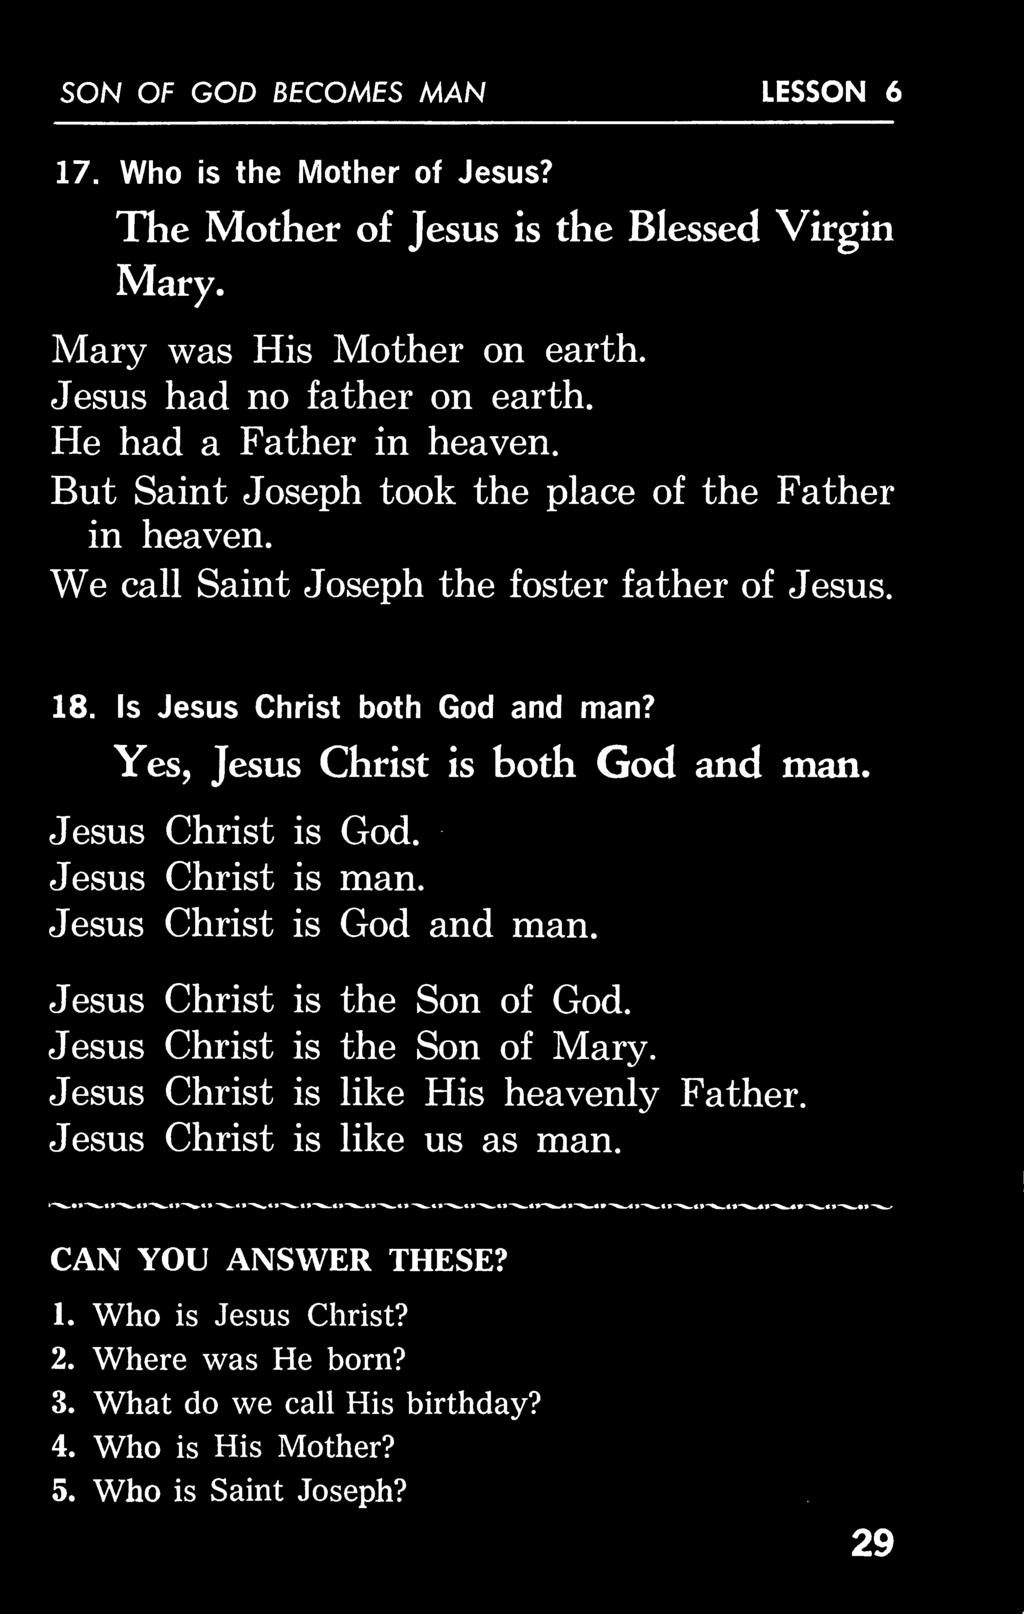 SON OF GOD BECOMES MAN LESSON 6 17. Who is the Mother of Jesus? The Mother of Jesus is Mary. the Blessed Virgin Mary was His Mother on earth. Jesus had no father on earth. He had a Father in heaven.